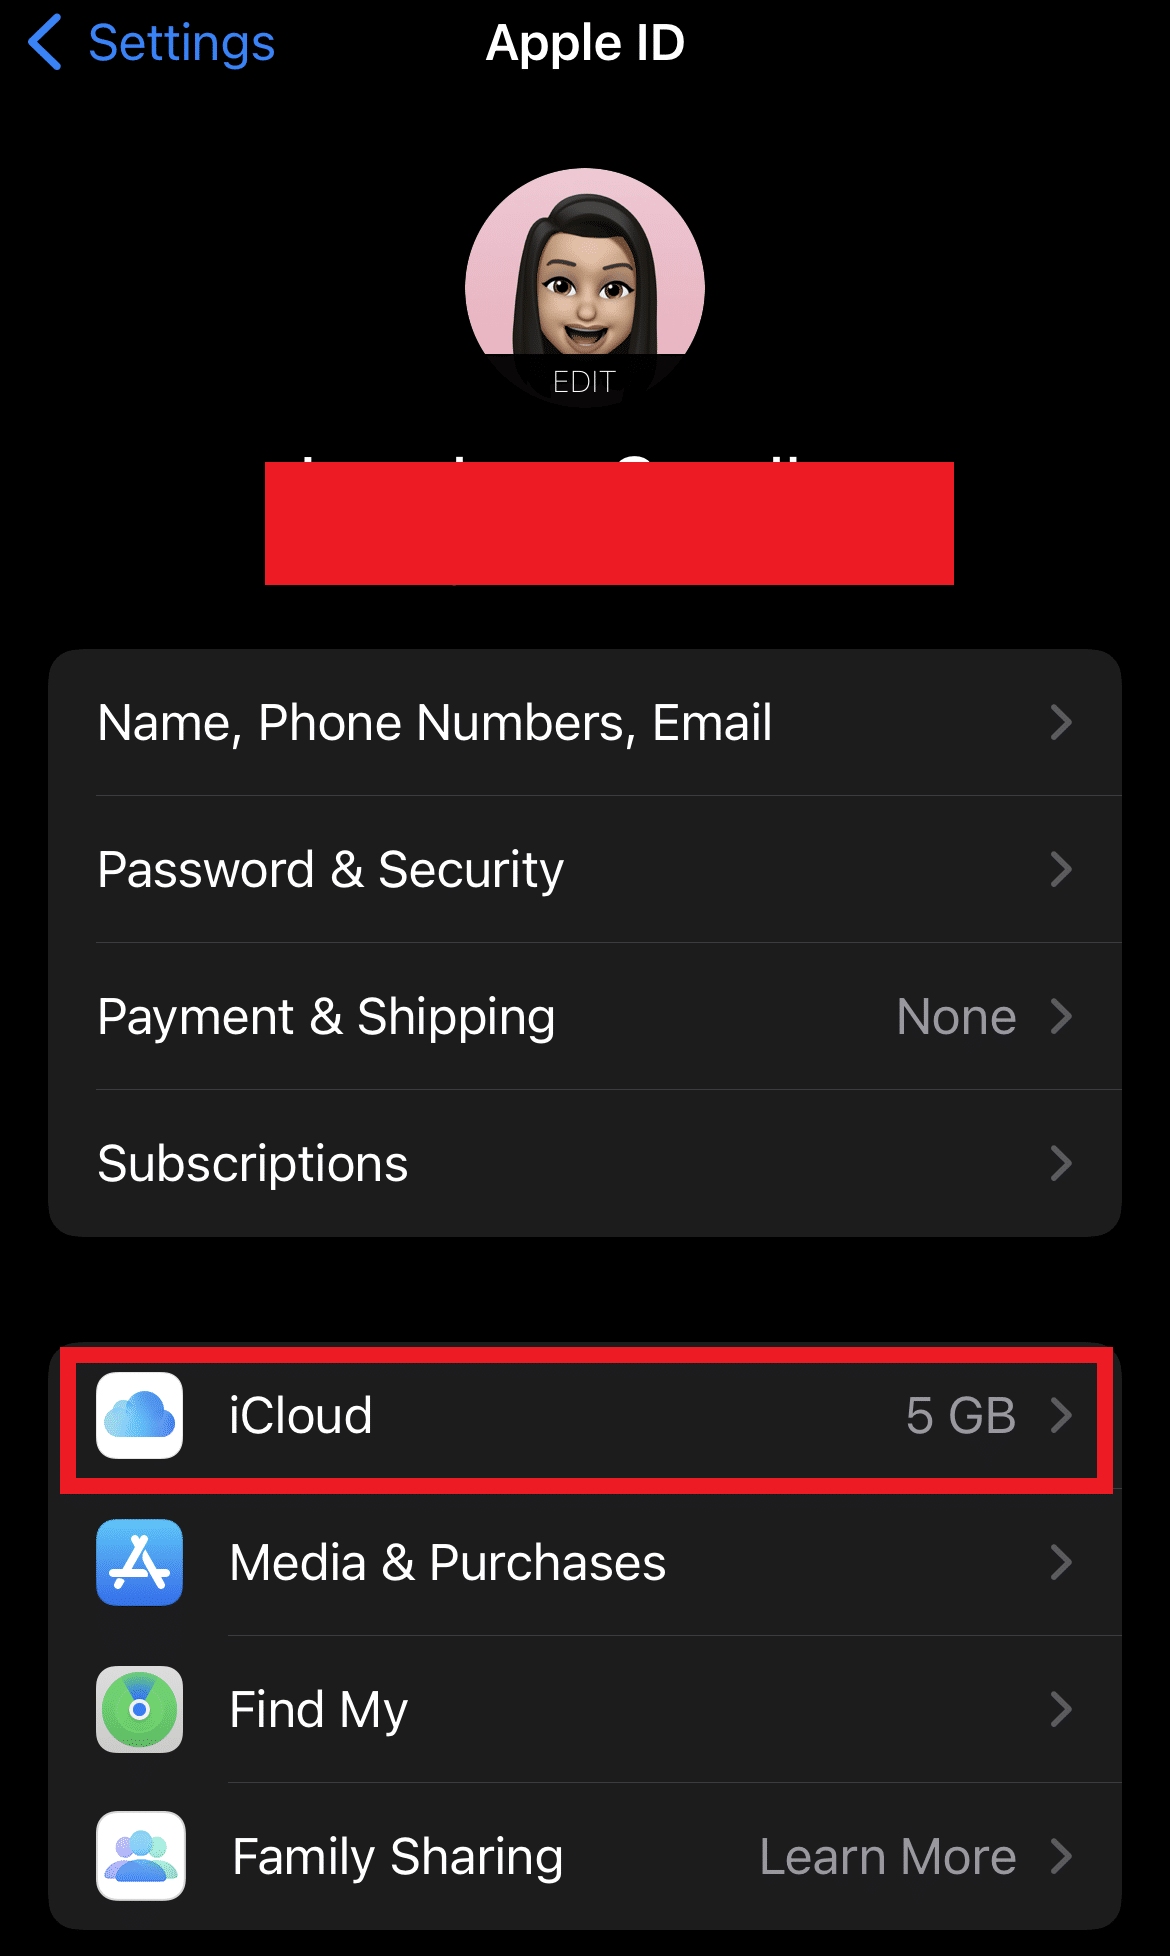 Tap on the iCloud option